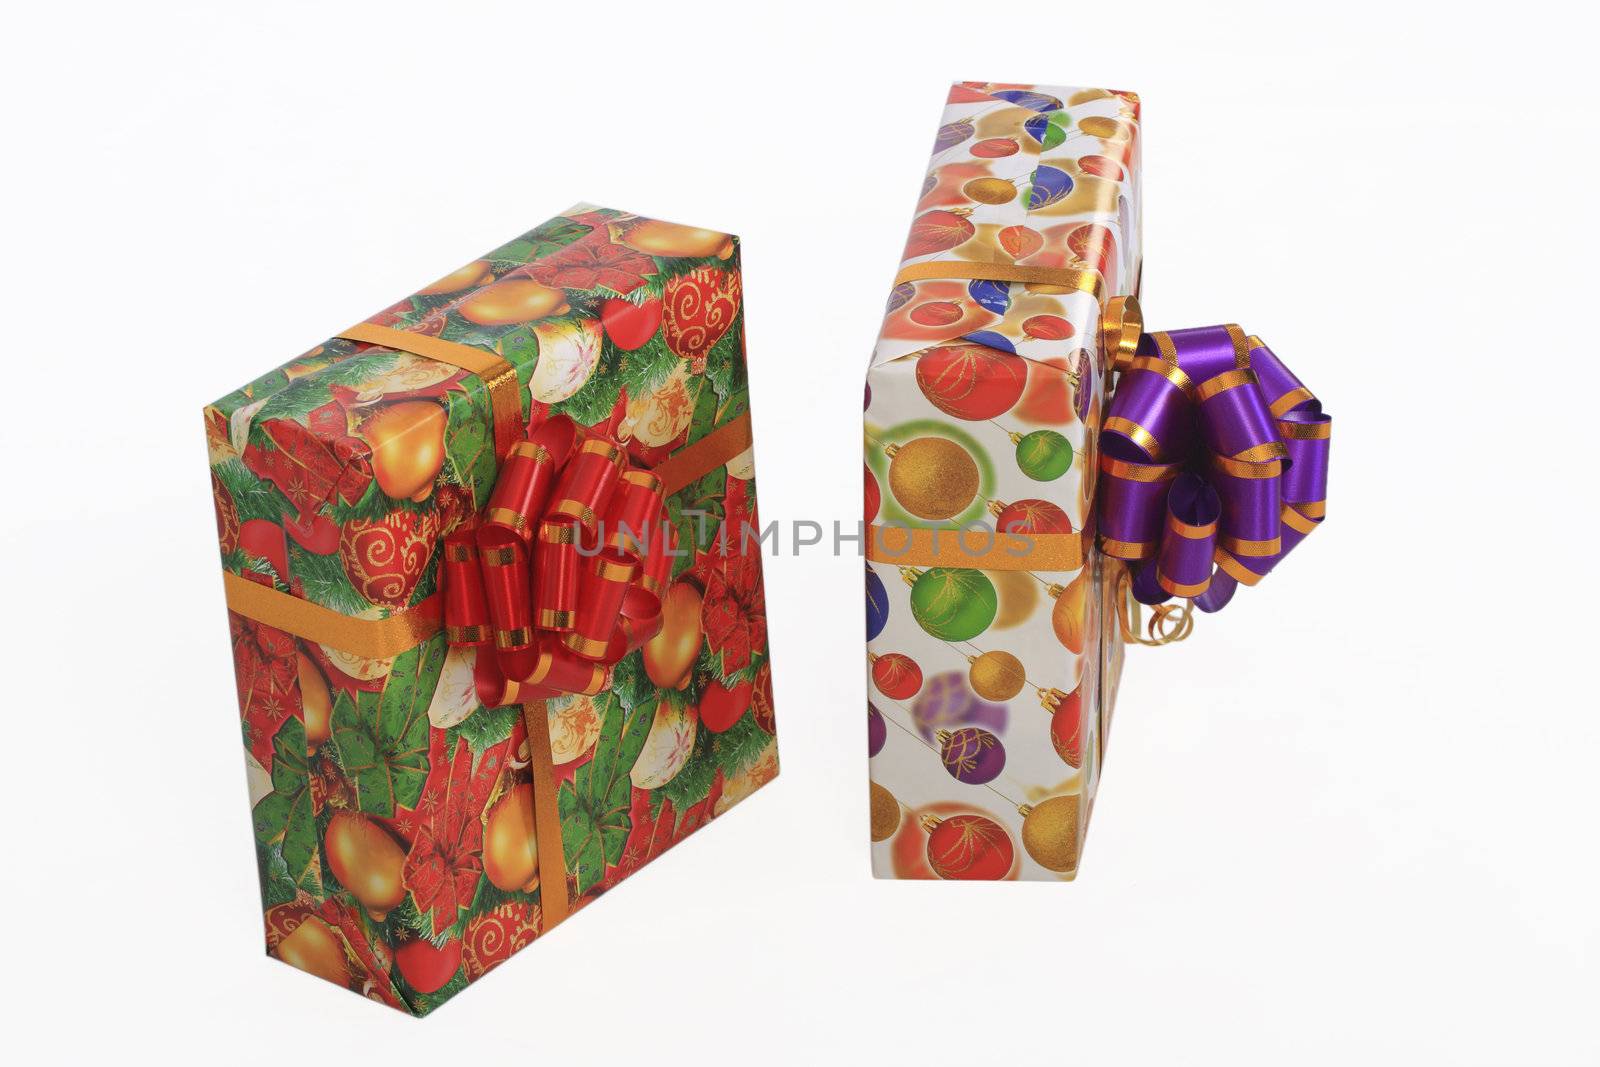 Boxes with gifts by fogen